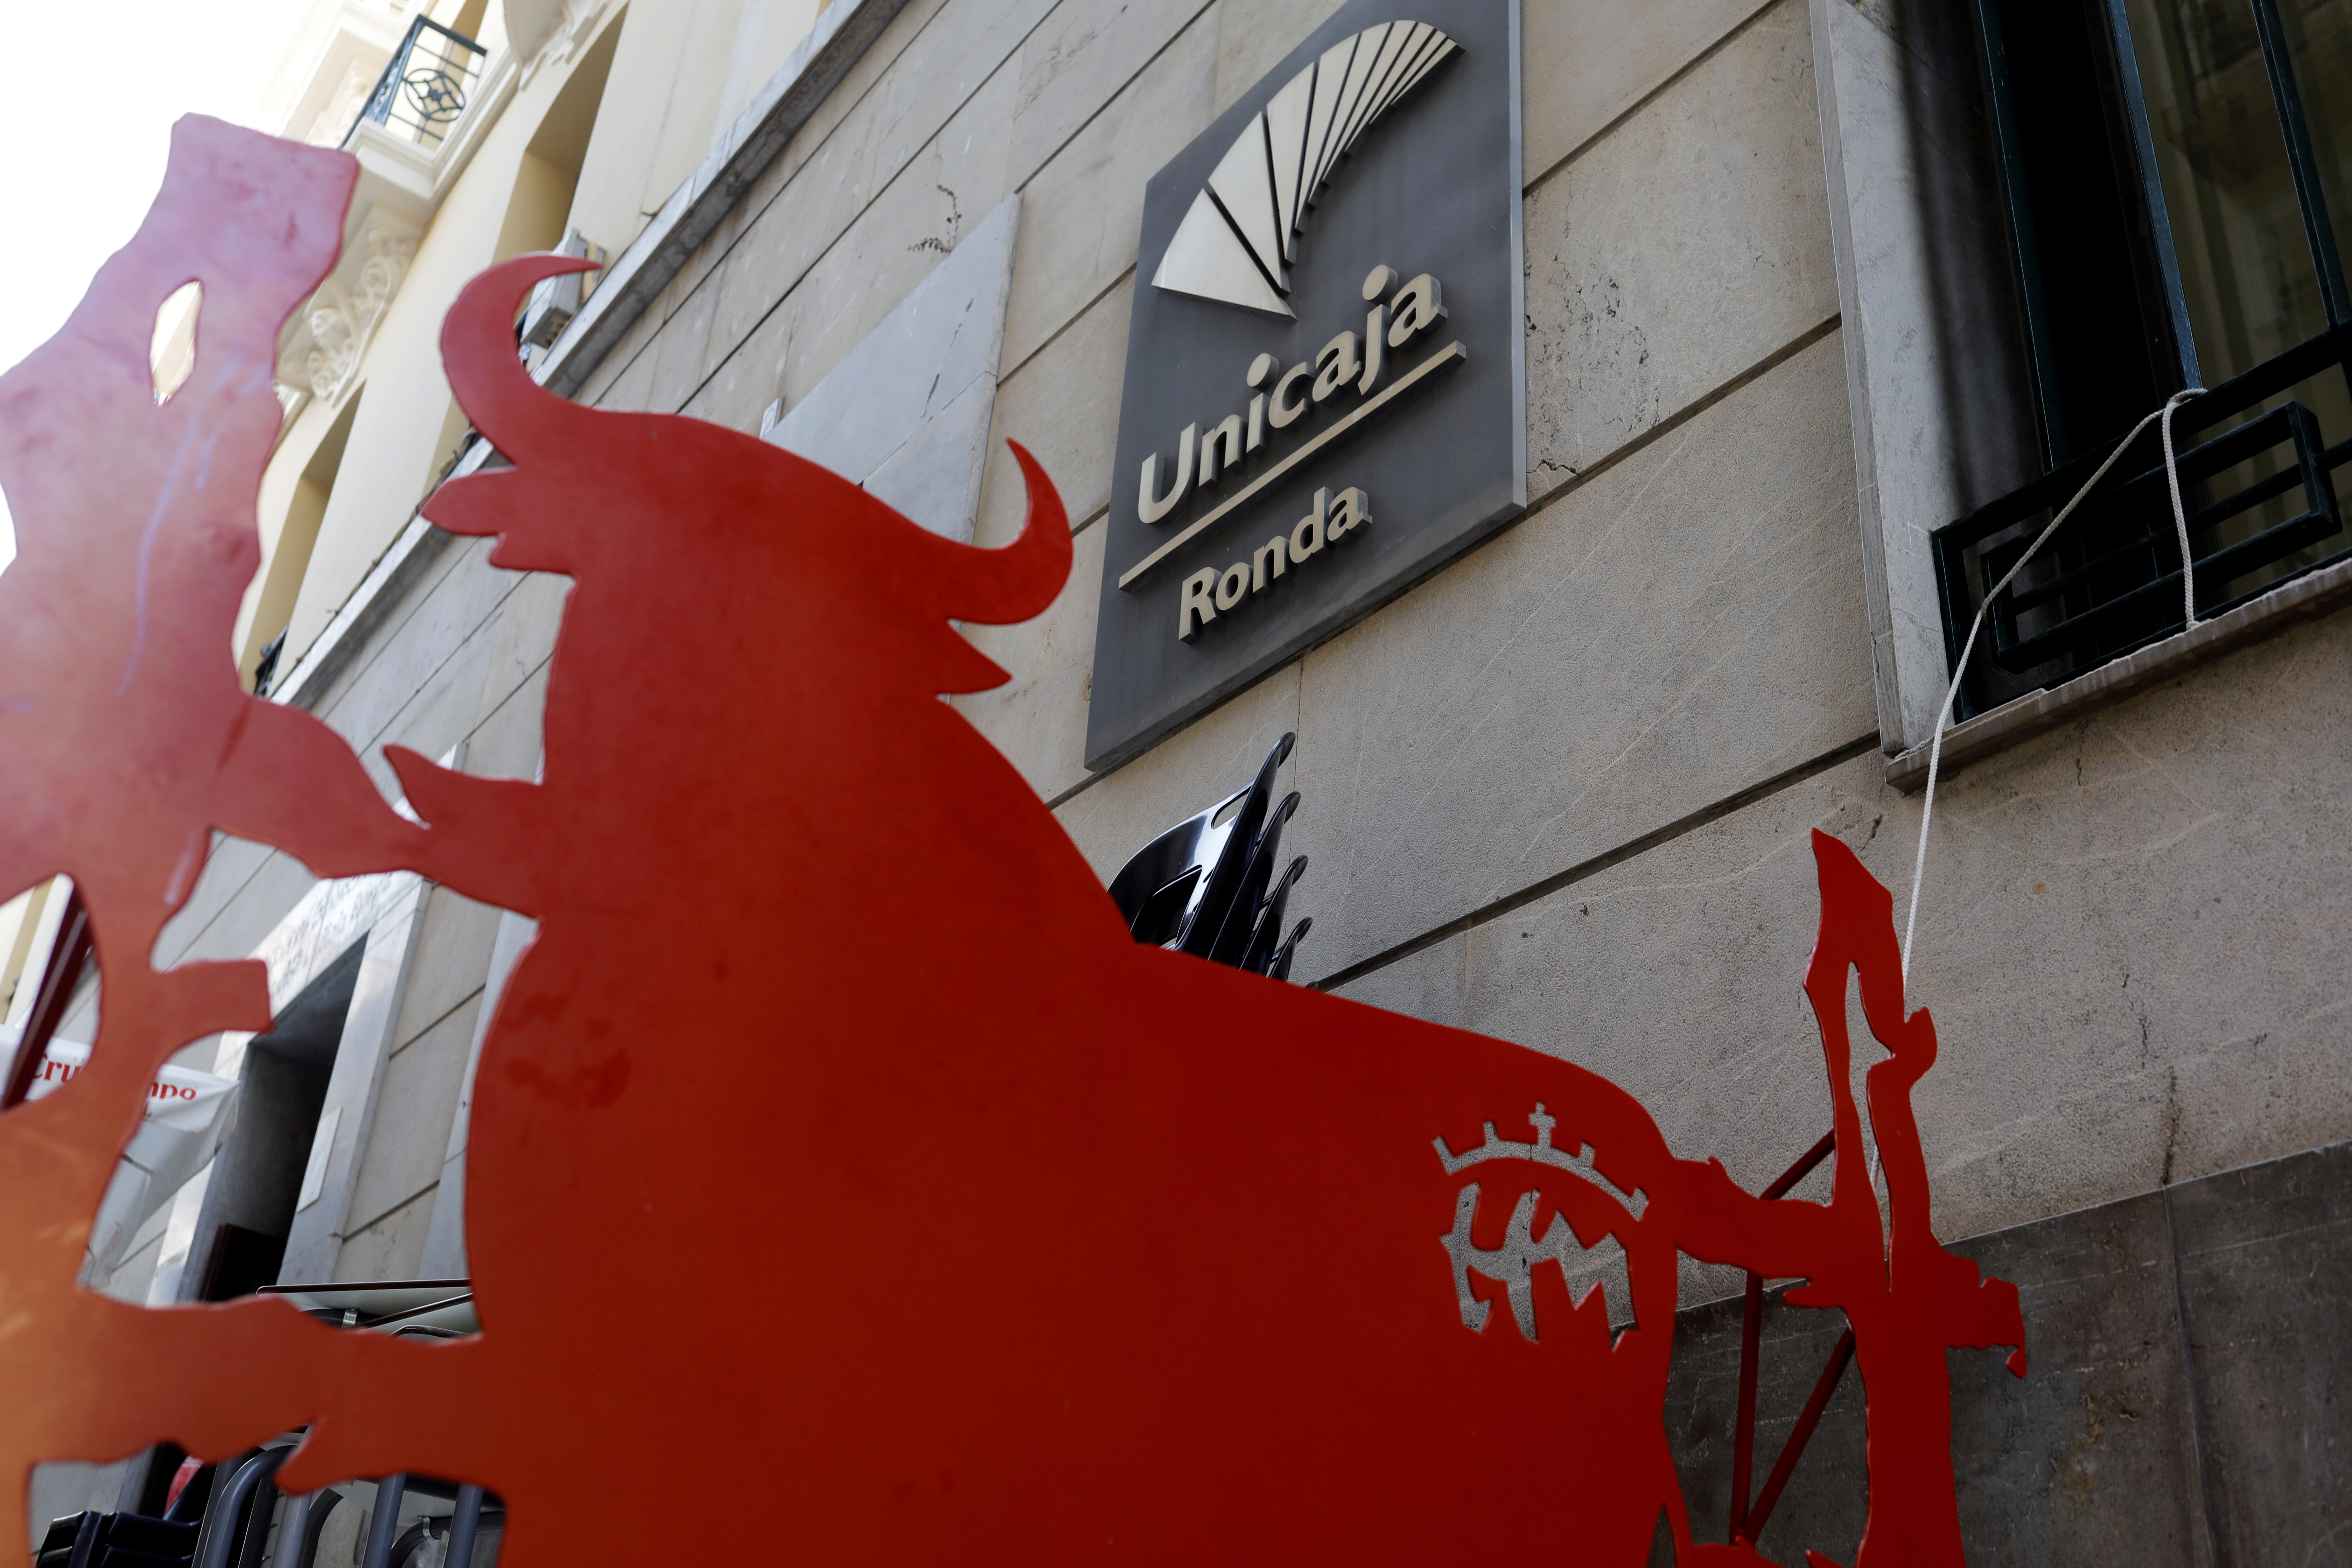 The logo of Unicaja bank is seen on the facade of a Unicaja bank branch in Ronda, southern Spain, September 7, 2021. REUTERS/Jon Nazca//File Photo